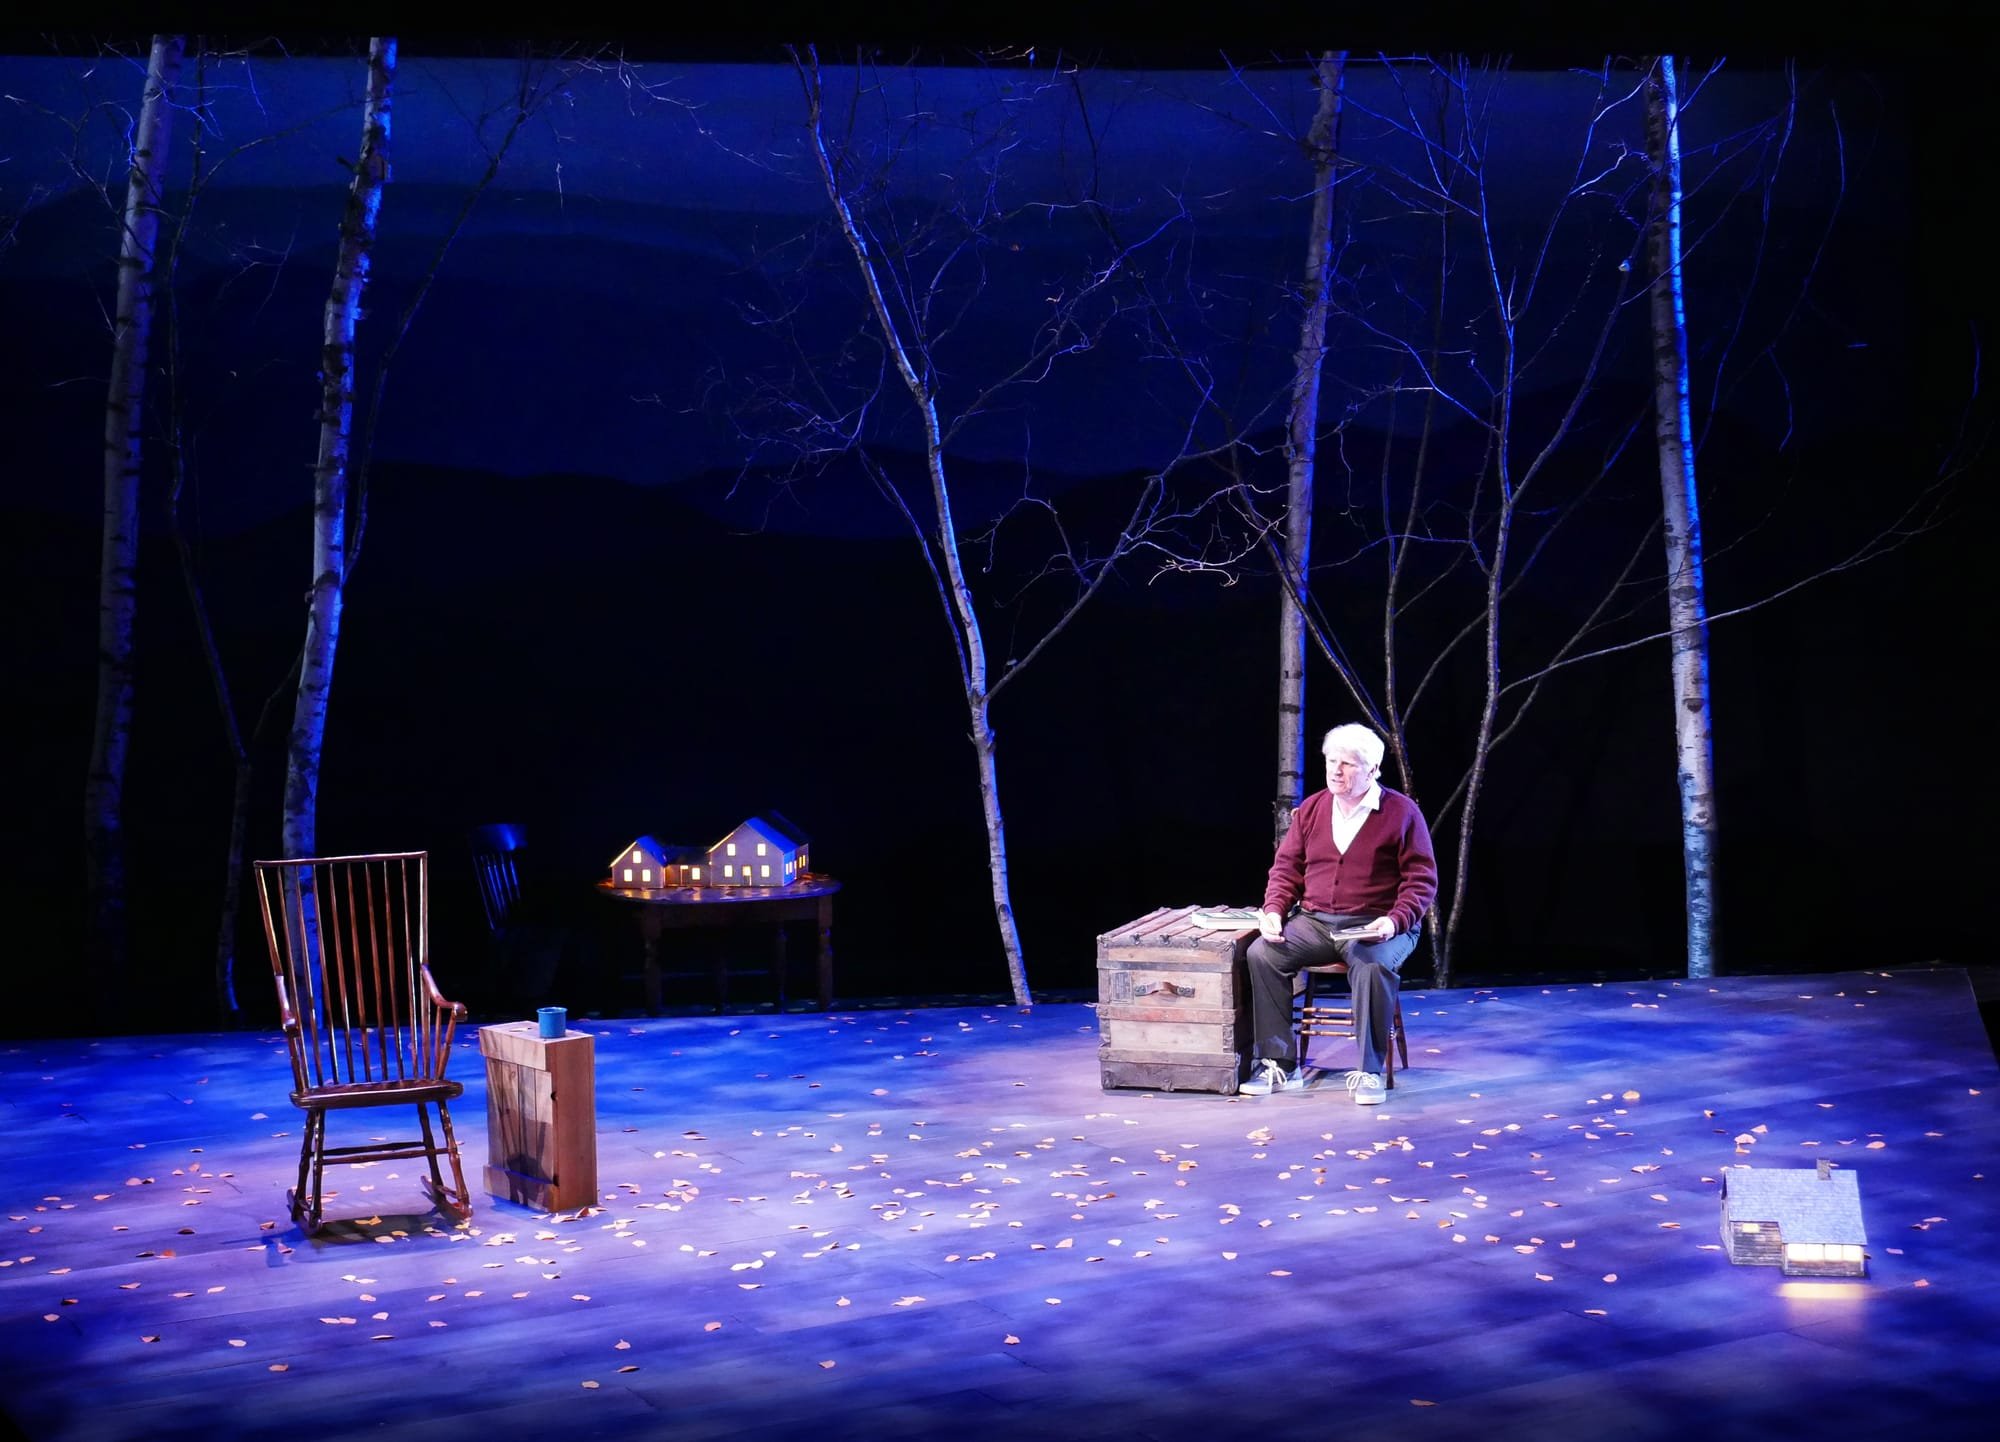 Gordon Clapp in "Robert Frost: This Verse Business" - by A.M. Dolan at the BCA (Boston, MA.) - REVIEW